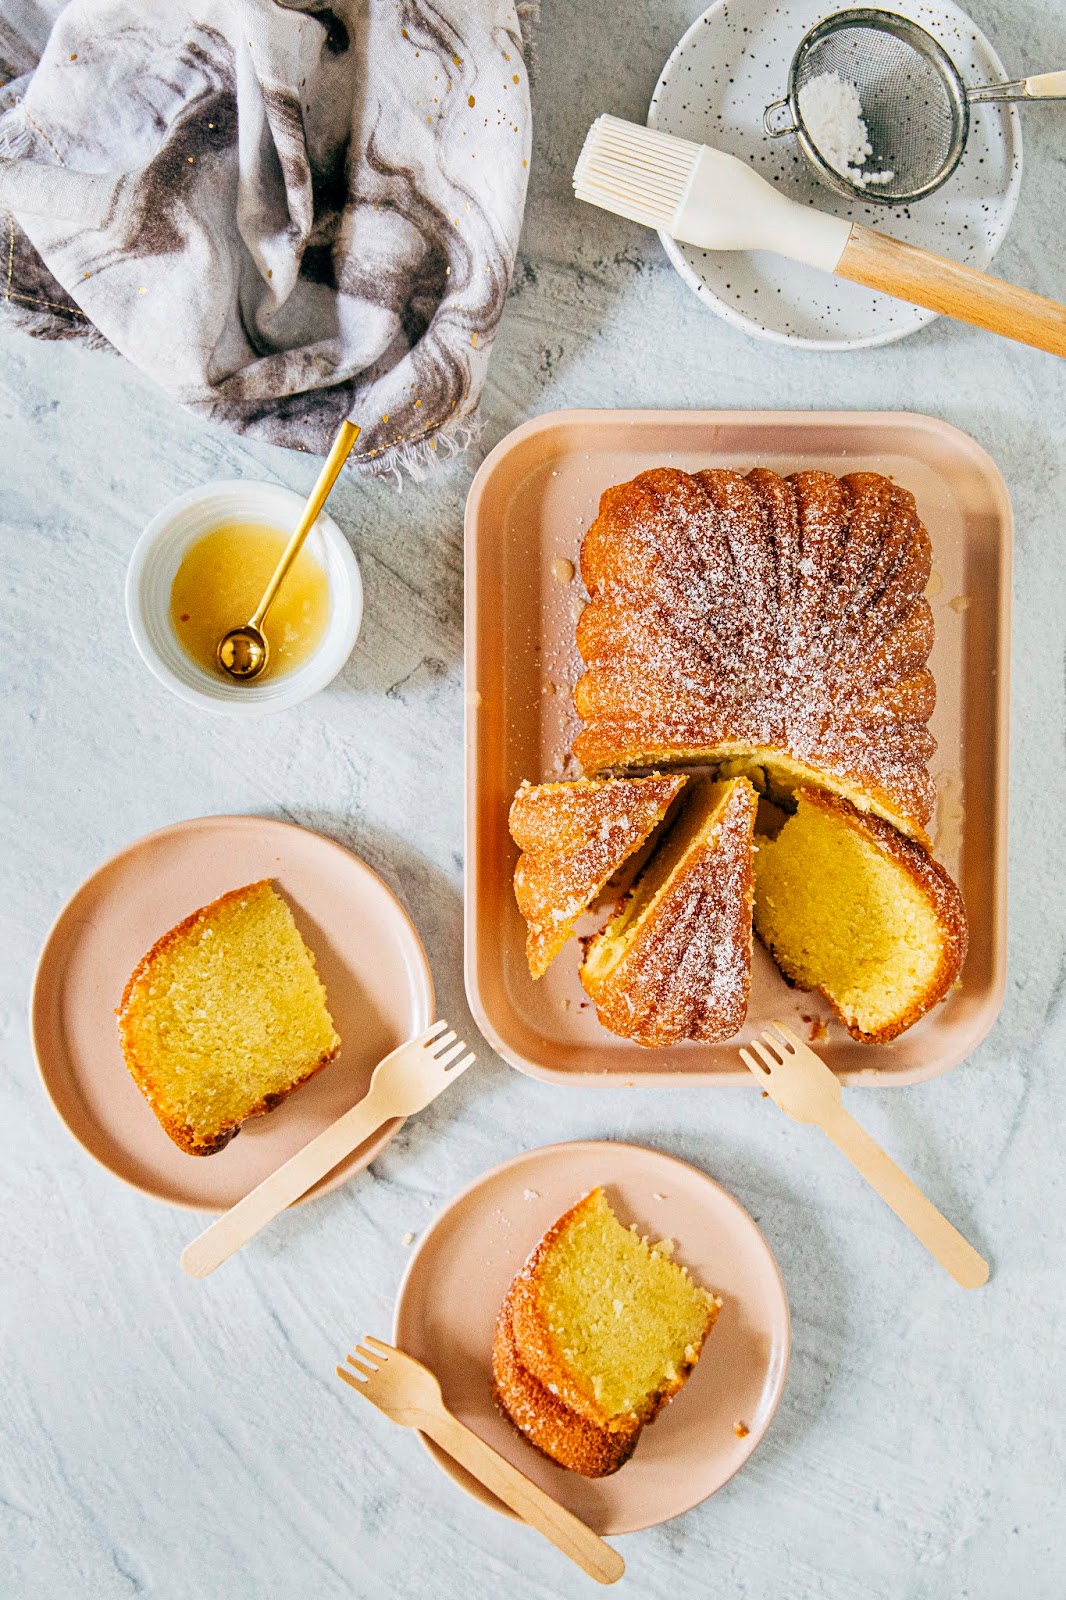 Orange Pound CakeIncredibly Moist and Orangy Gonna Want Seconds